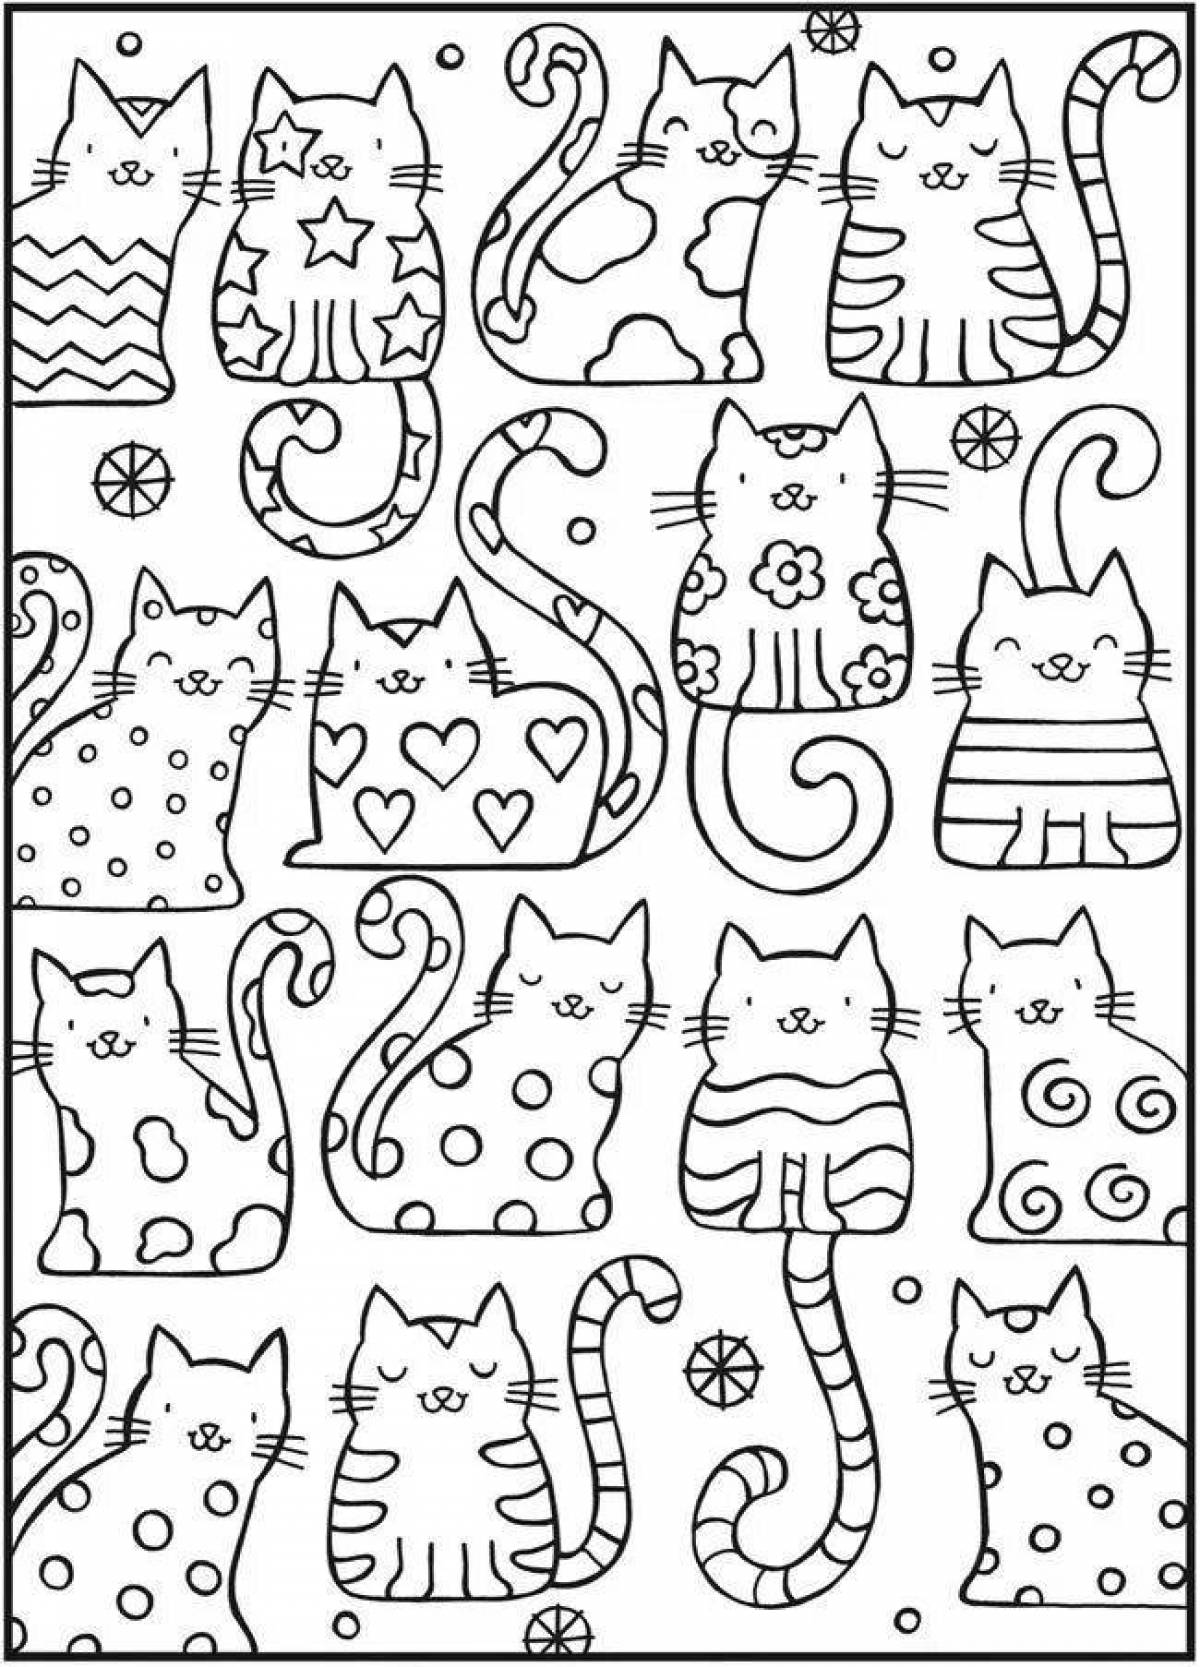 Exotic coloring book with lots of cats